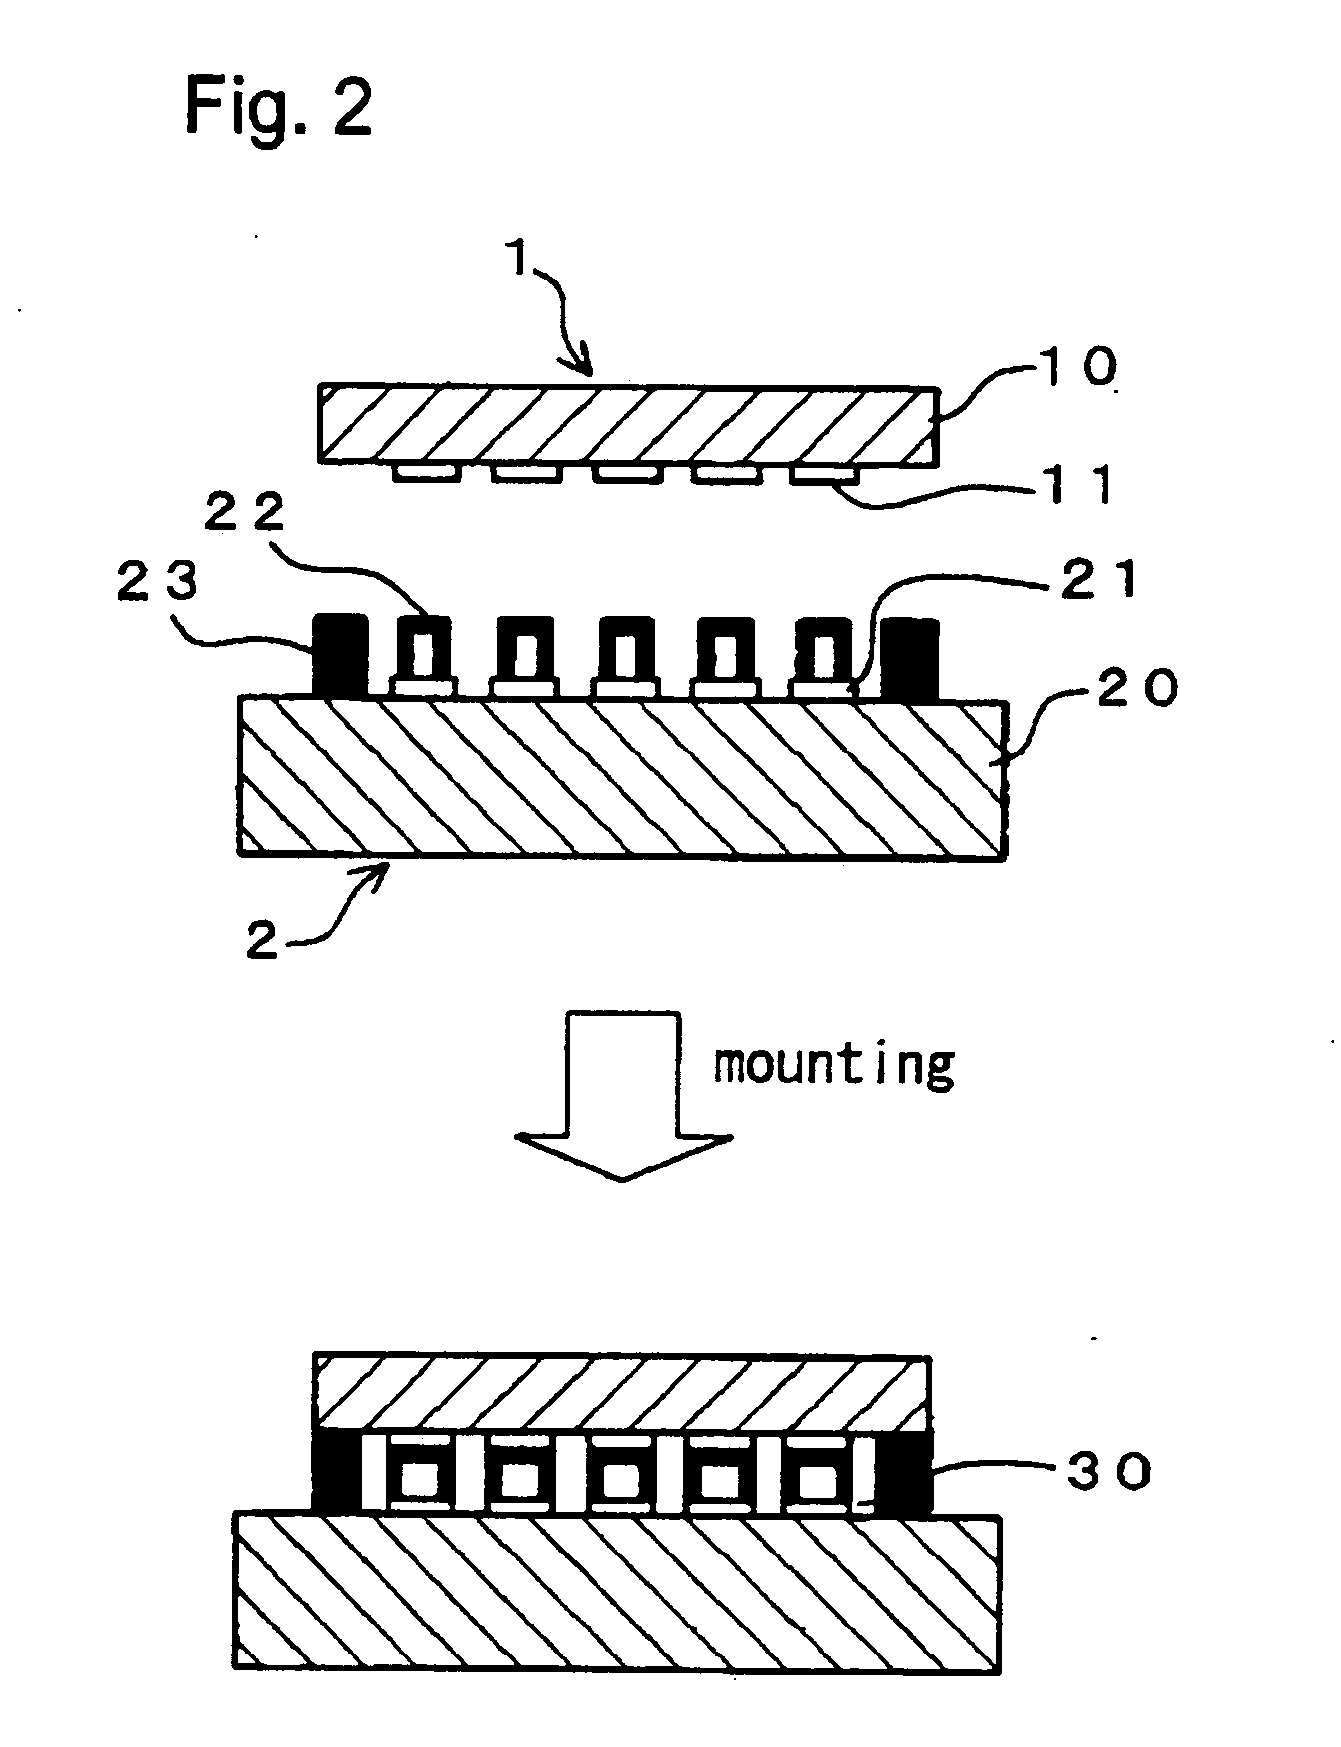 High-reliable semiconductor device using hermetic sealing of electrodes